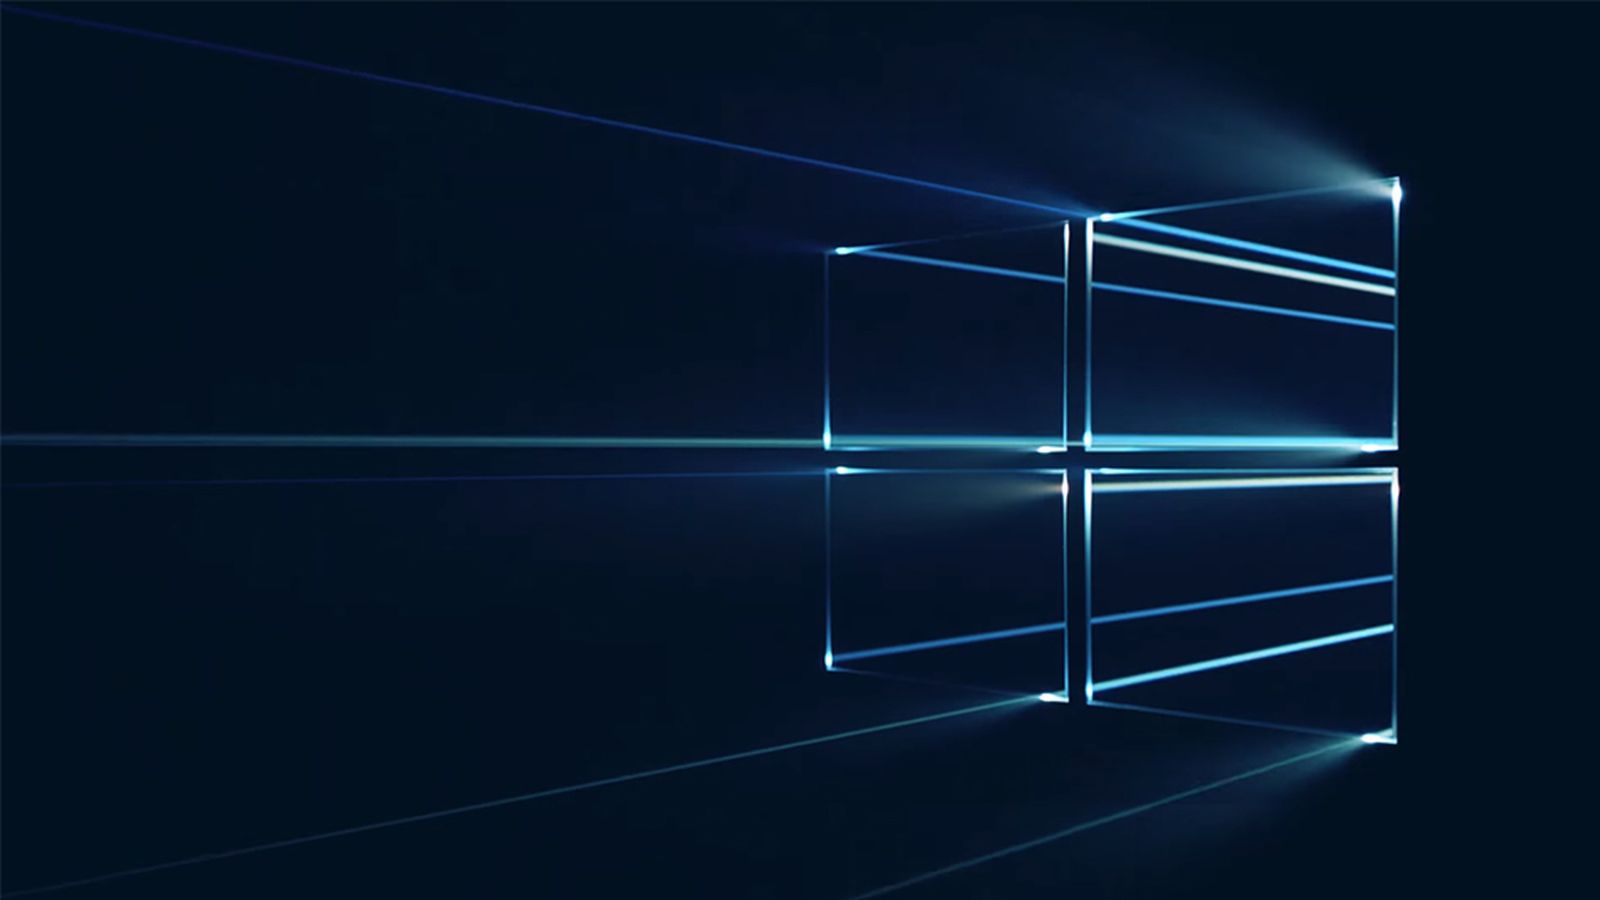 4k Windows 10 Wallpapers High Quality | Download Free